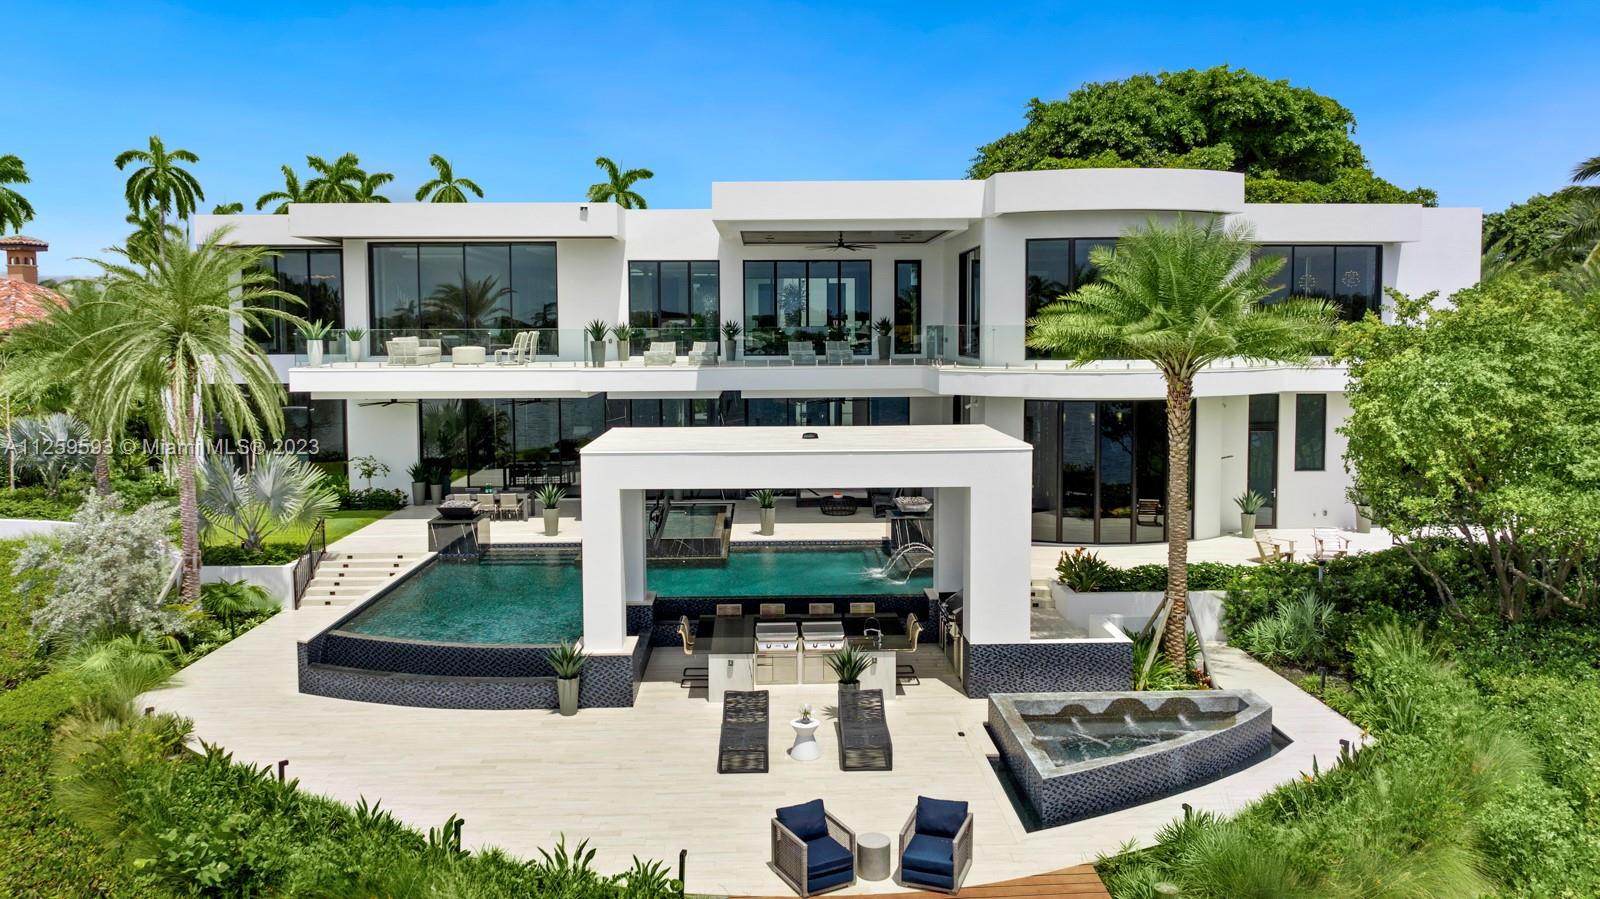 Step Inside With Me! The Mansion of Manalapan defines ultra modern architecture within the comforts of a real home. 110 Churchill by the Numbers: 9 baths, 8 beds, 7 terraces, 6 bars, 5 garages, 4 lounges, 3 kitchens, 2 primary suite closets, & 1 Theatre, Office, Cigar lounge, & Gym. Meticulously designed by a budget-less owner, specialty features include 26 FT ceilings, wine room, & multiple fireplaces. The culinary experience is complete with show+prep+glass kitchens. The primary suite exemplifies opulence with dual walk-in closets & baths, midnight bar, glass sitting area and an oversized terrace. The entertainer’s stage is set outdoors overlooking the calm waters with sparkling pool, spa, & grand gazebo for hosting. Churchill Way: an address that represents elegance, history, & privacy.